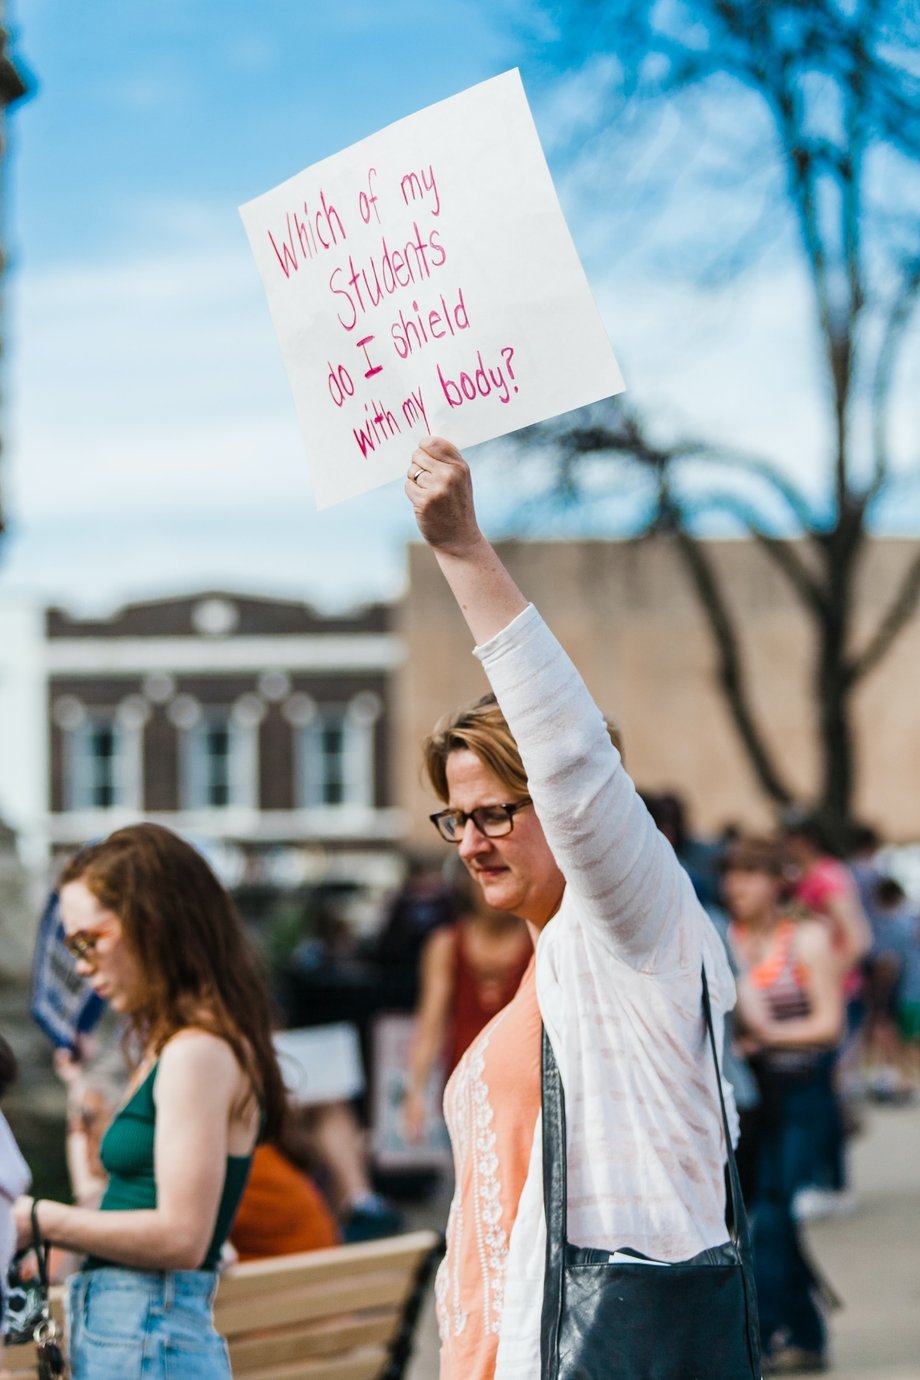 Woman holding a sign saying "which of my students do I protect with my body?" at a gun control protest